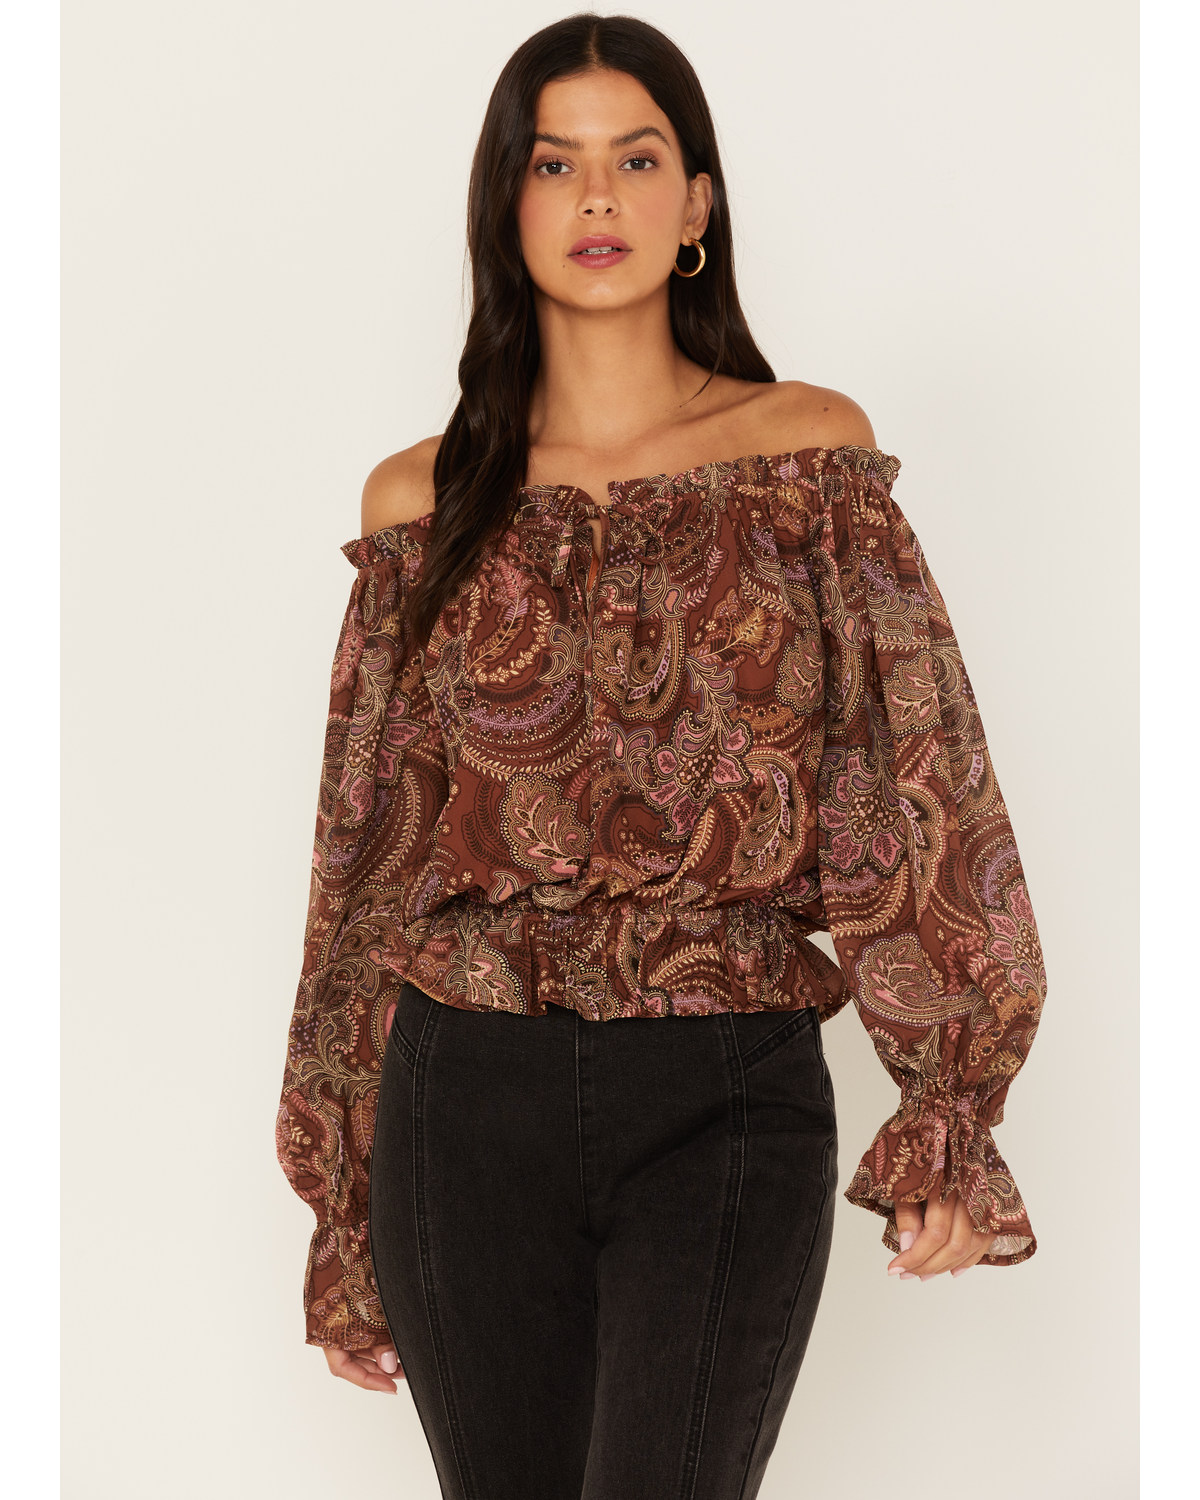 Flying Tomato Women's Paisley Print Off The Shoulder Top